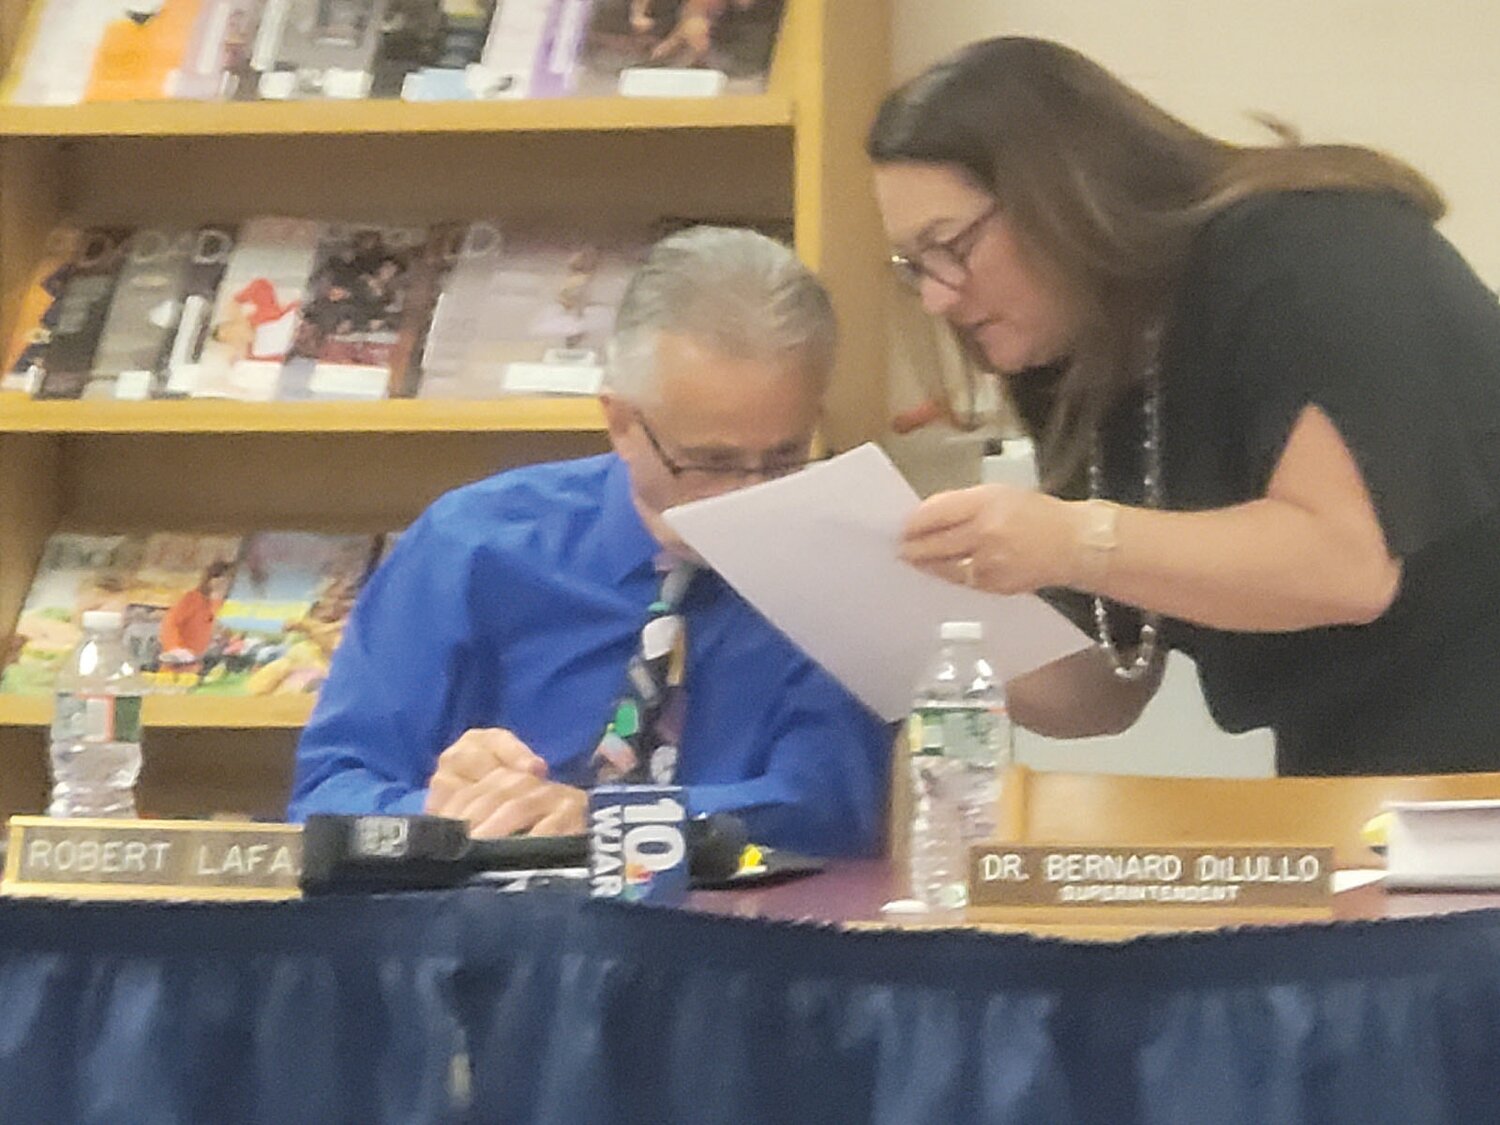 TAKING A STAND: Earlier this summer, after the mayor announced an attempted 'takeover' of school finances, School Committee Chairman Robert LaFazia and member Susan Mansolillo conferred prior to announcing the board's response.